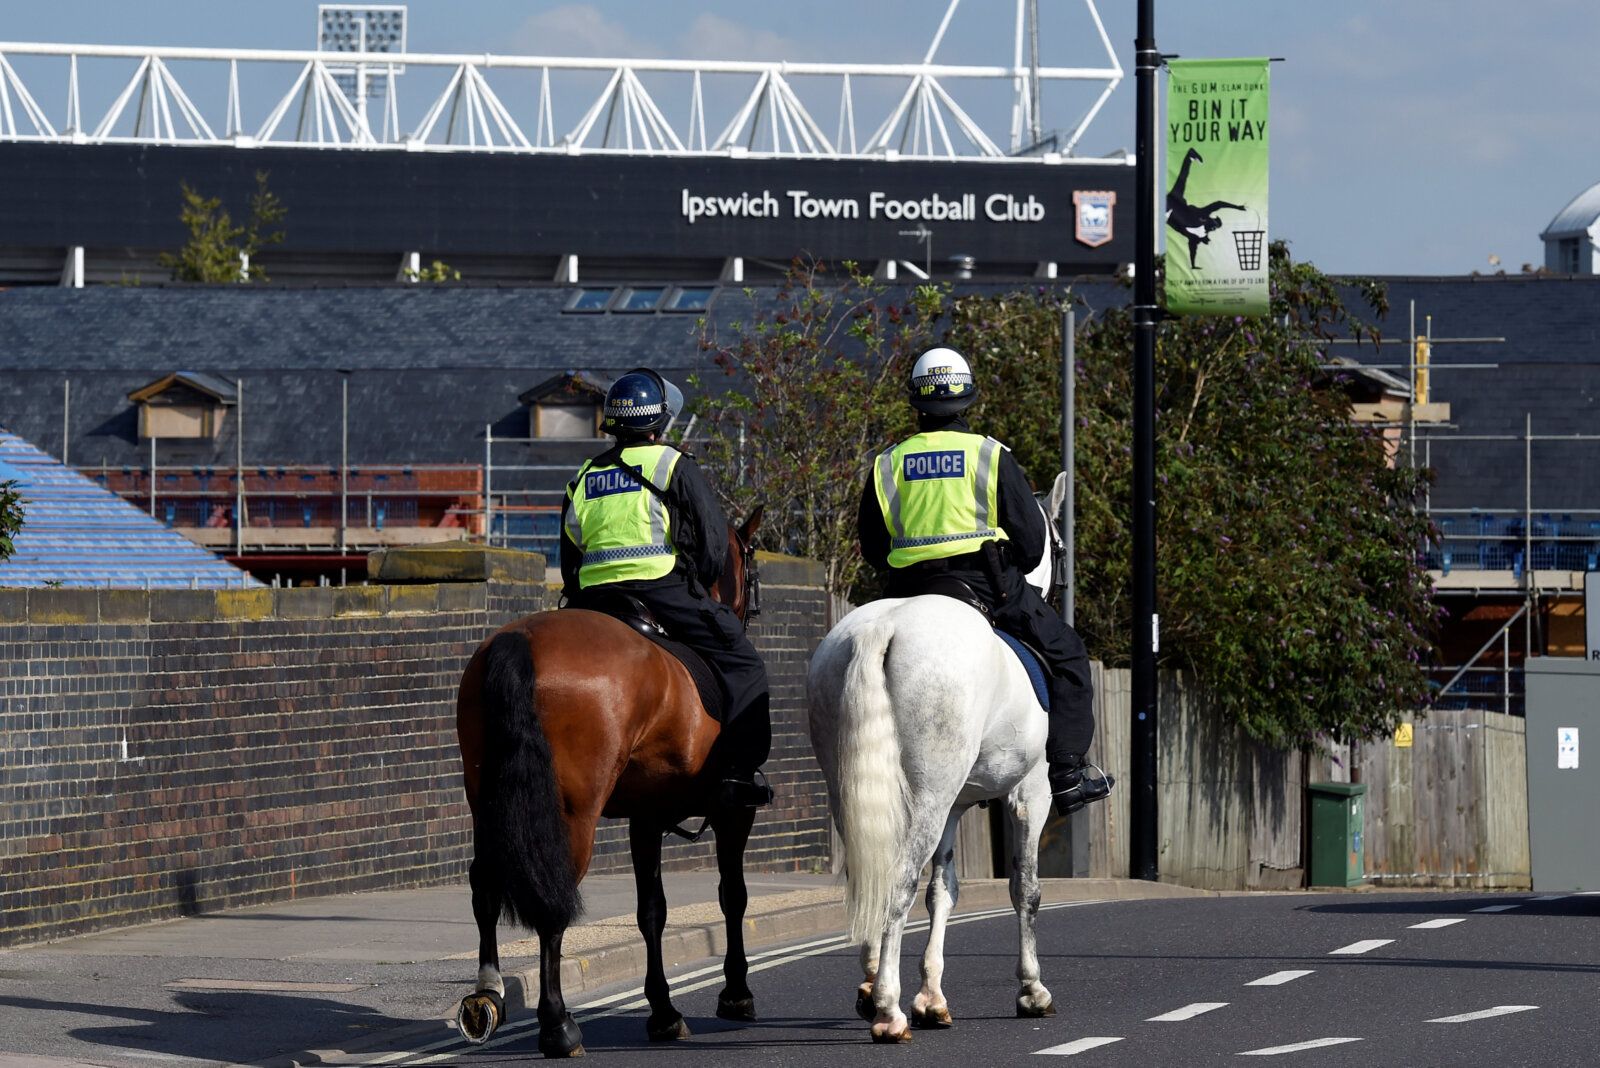 Soccer Football - Championship - Ipswich Town v Norwich City - Portman Road, Ipswich, Britain - September 2, 2018  Police officers before the game  Action Images/Adam Holt  EDITORIAL USE ONLY. No use with unauthorized audio, video, data, fixture lists, club/league logos or 